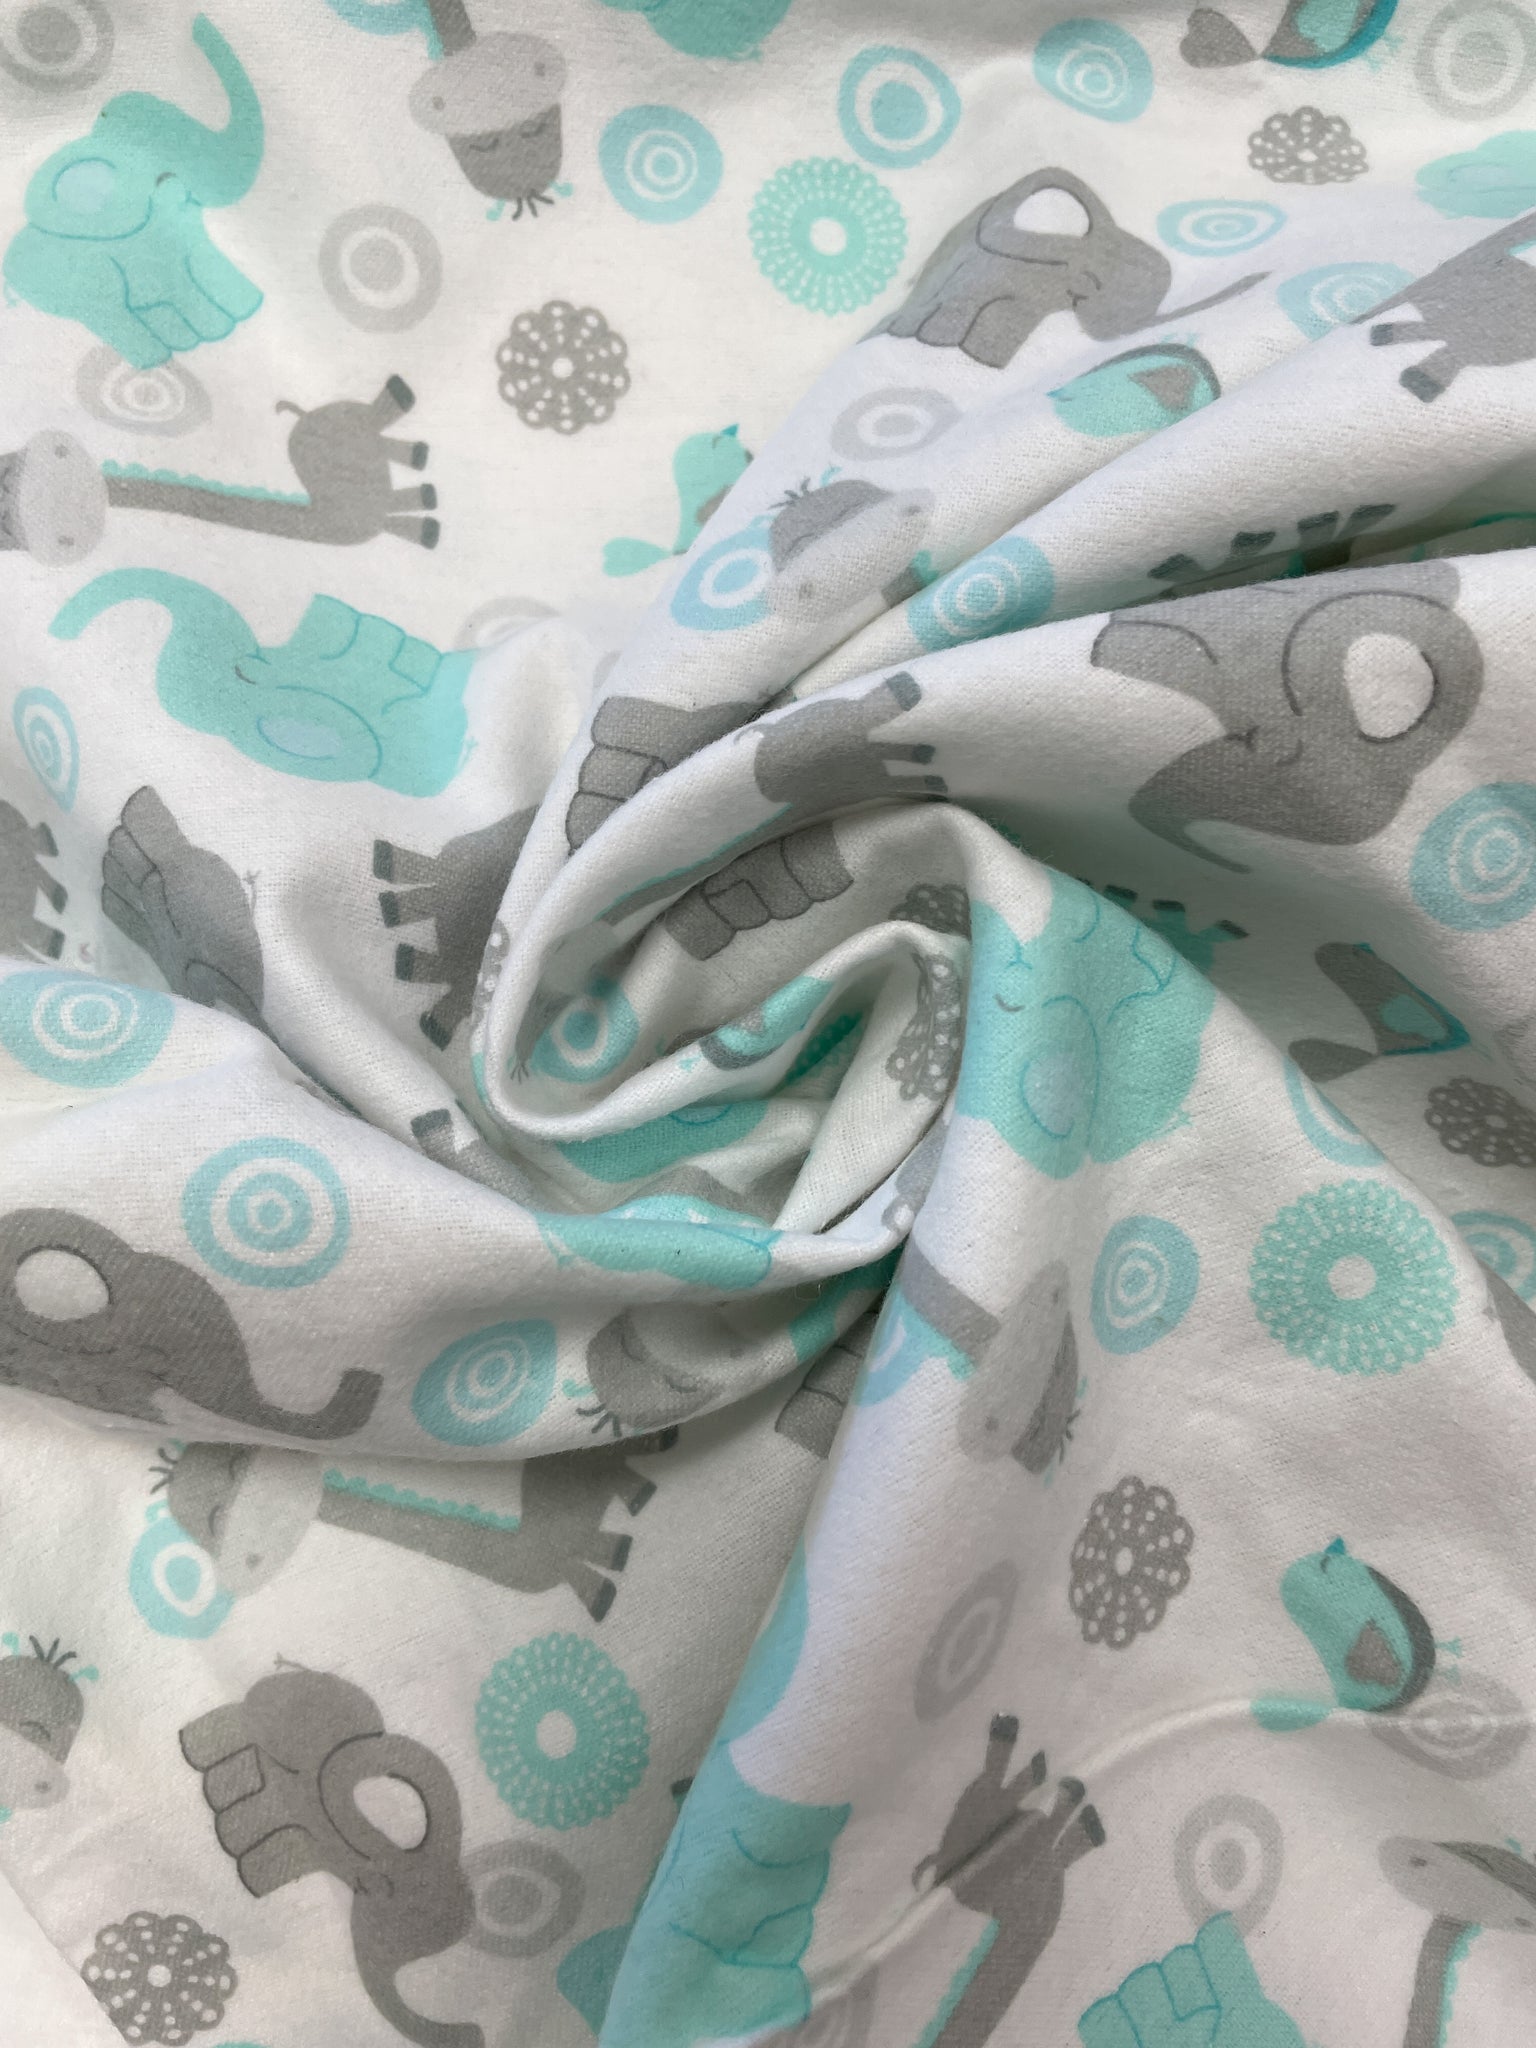 1 YD Cotton Flannel - White with Gray and Aqua Elephants, Giraffes and Birds